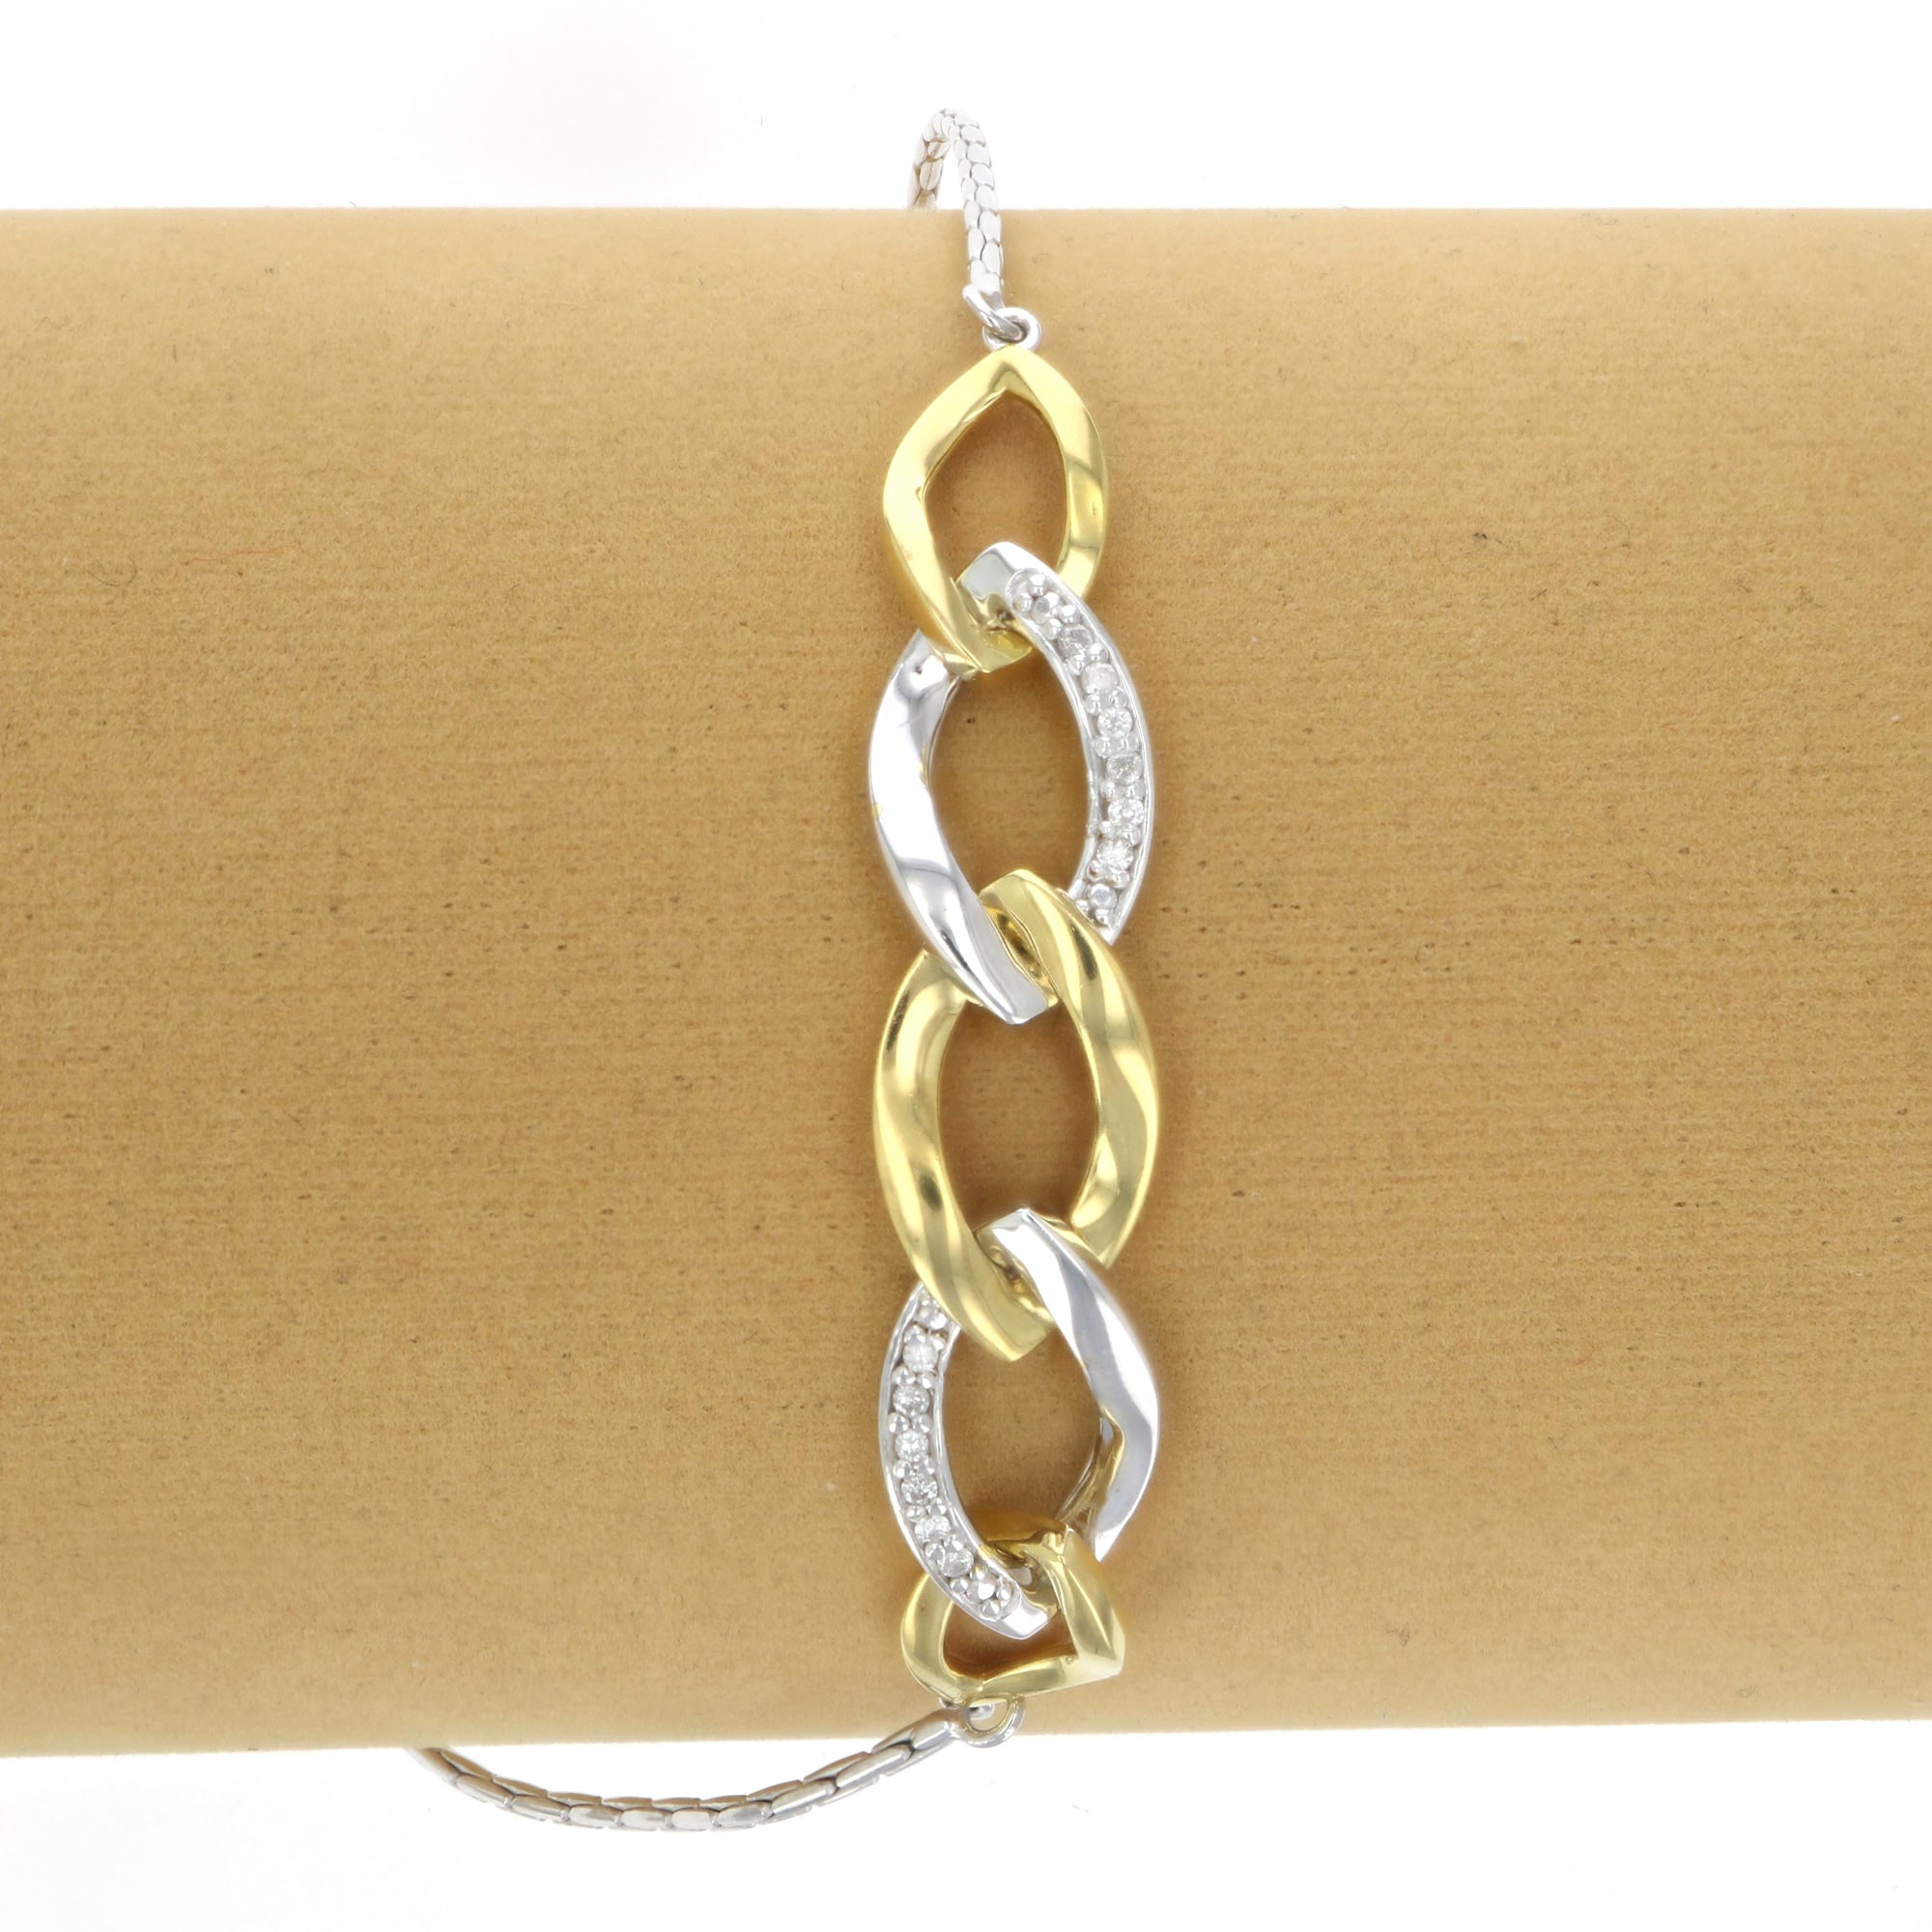 1/10 cttw Diamond Bolo Bracelet Yellow Gold Plated over Sterling Silver Links